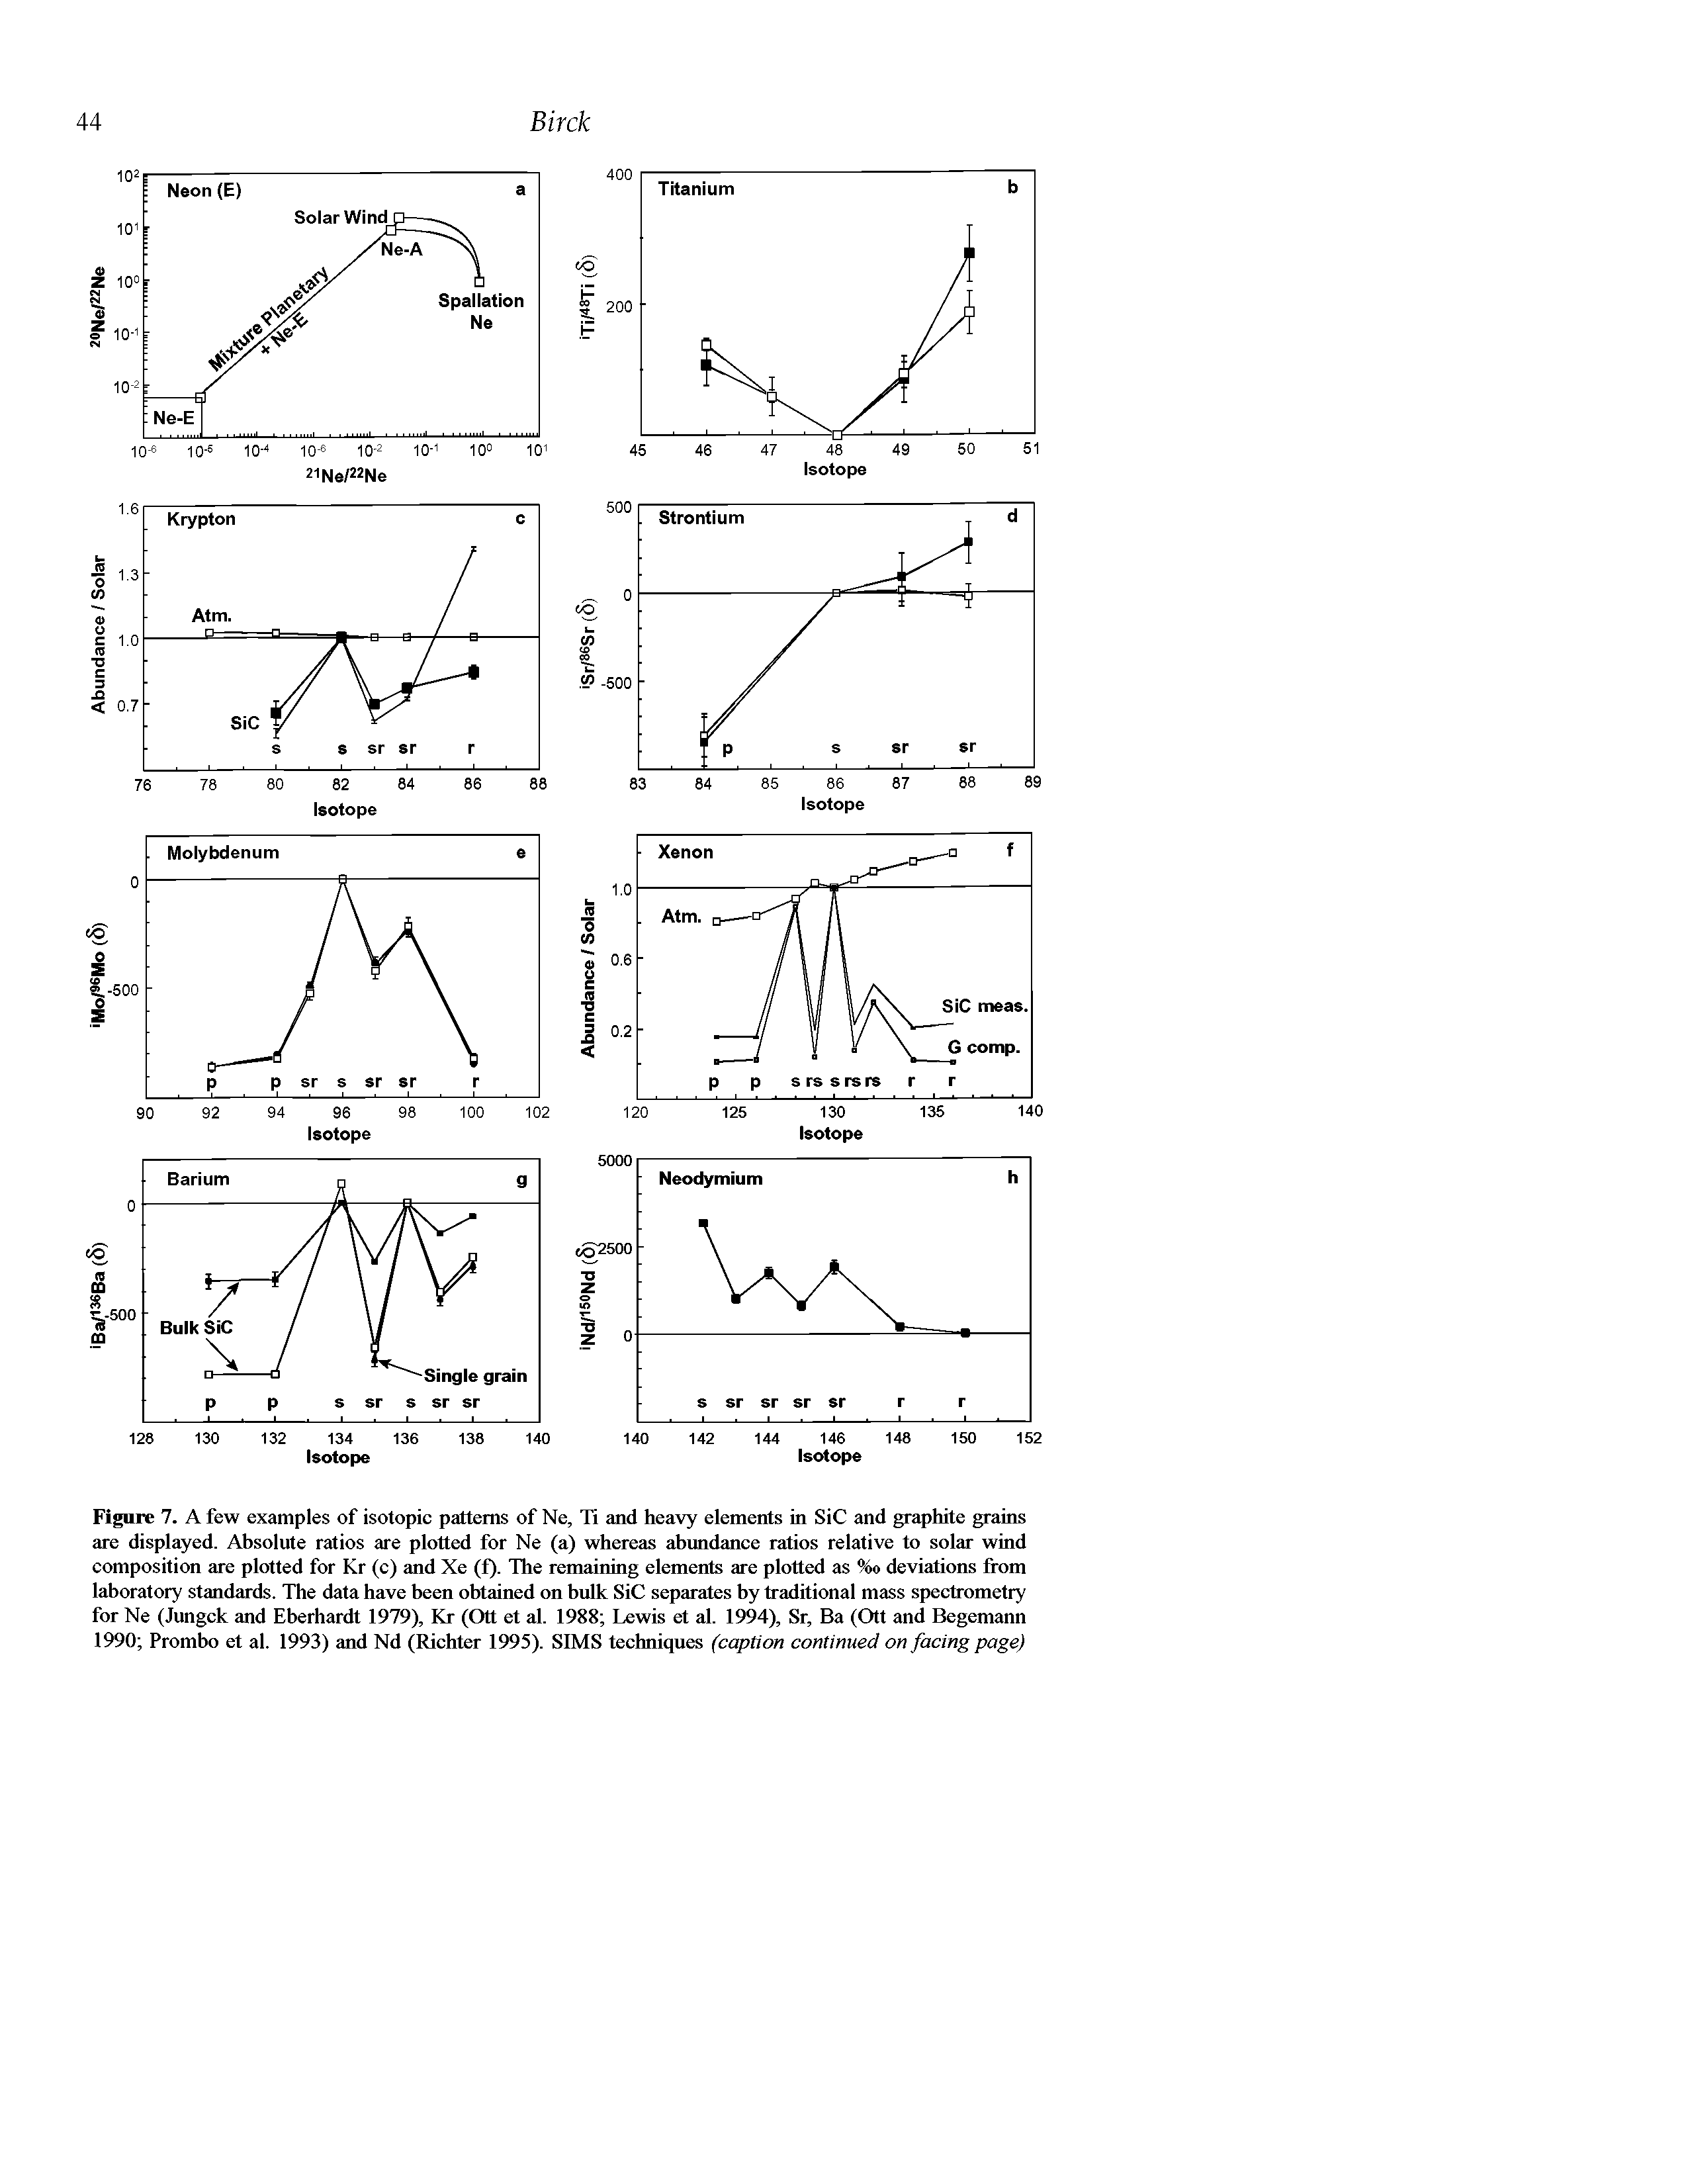 Figure 7. A few examples of isotopic patterns of Ne, Ti and heavy elements in SiC and graphite grains are displayed. Absolute ratios are plotted for Ne (a) whereas abundance ratios relative to solar wind composition are plotted for Kr (c) and Xe (f). The remaining elements are plotted as %o deviations from laboratory standards. The data have been obtained on bulk SiC separates by traditional mass spectrometry for Ne (Jungck and Eberhardt 1979), Kr (Ott et al. 1988 Lewis et al. 1994), Sr, Ba (Ott and Begemann 1990 Prombo et al. 1993) and Nd (Richter 1995). SIMS techniques (caption continued on facing page)...